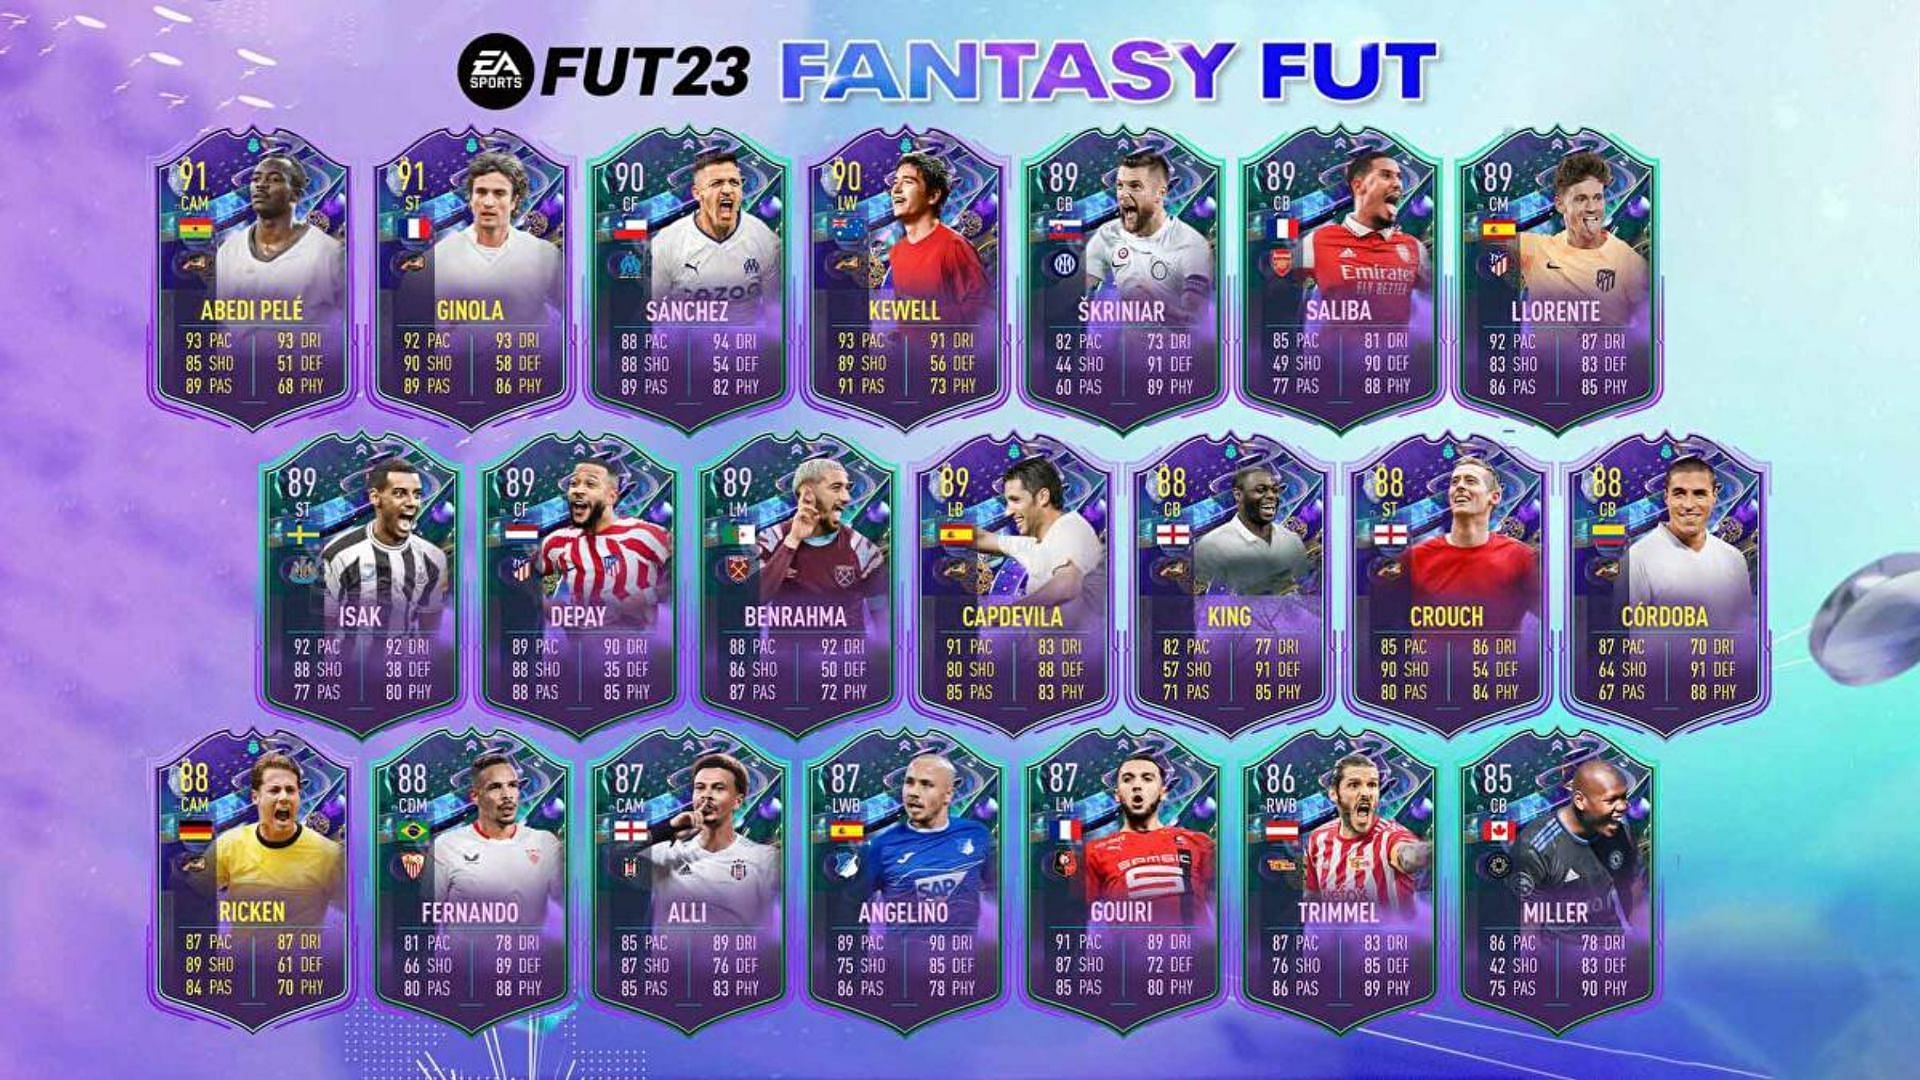 The upgrade potential of the FIFA 23 Fantasy FUT cards could make them significantly better after the next few weeks (Image via EA Sports)